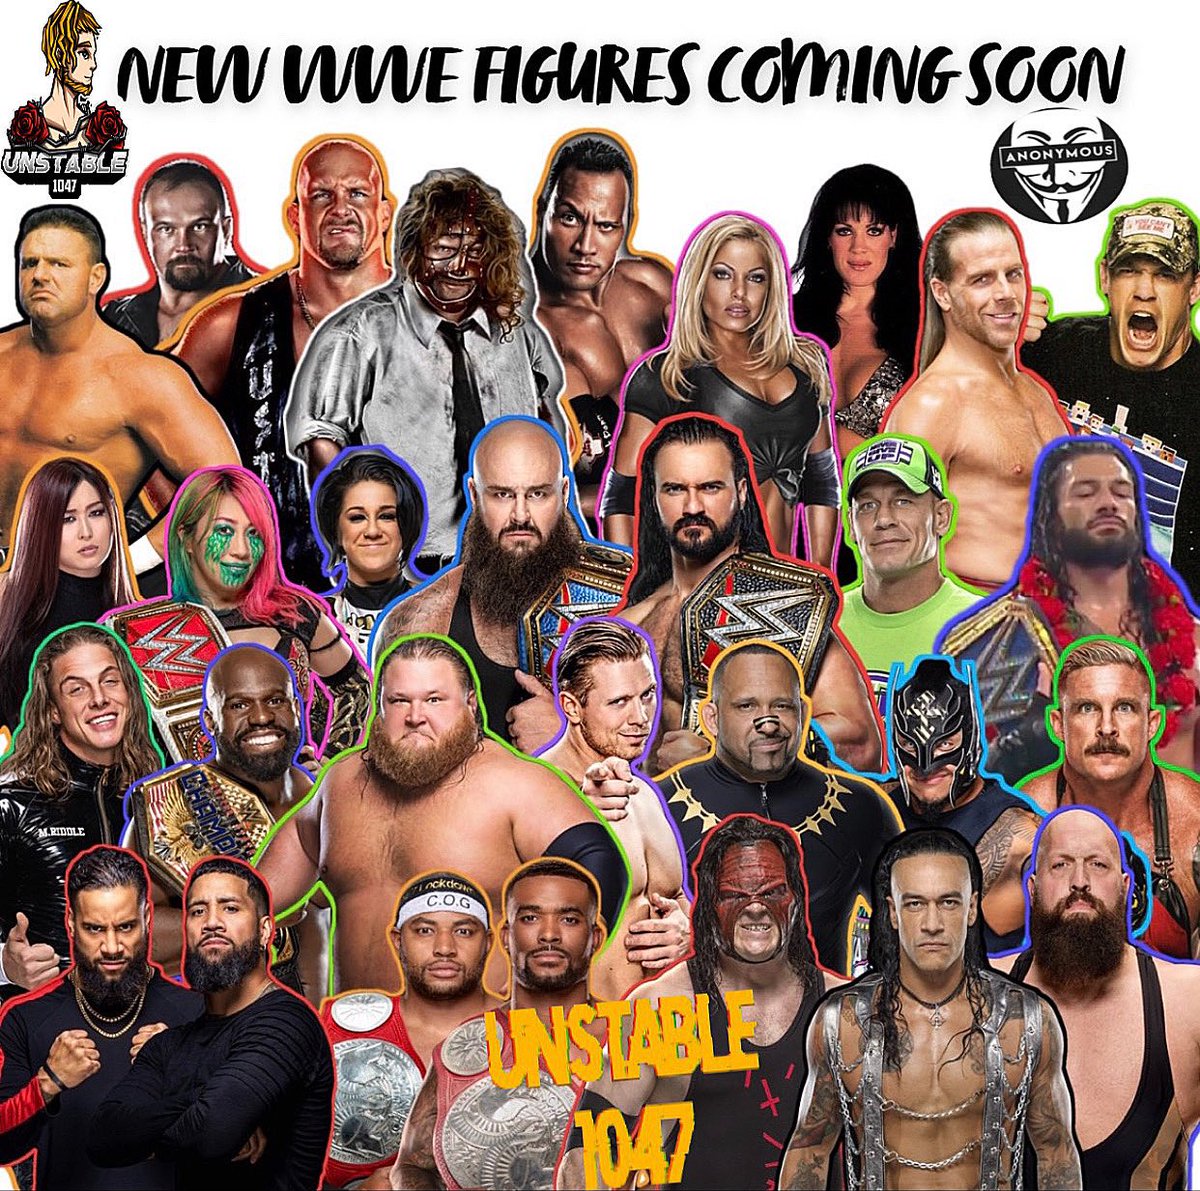 Make sure you guys are subscribed to my YouTube channel Unstable1047. Always post on there first. But here’s some upcoming wwe action figures. Mixture of basics & elites.